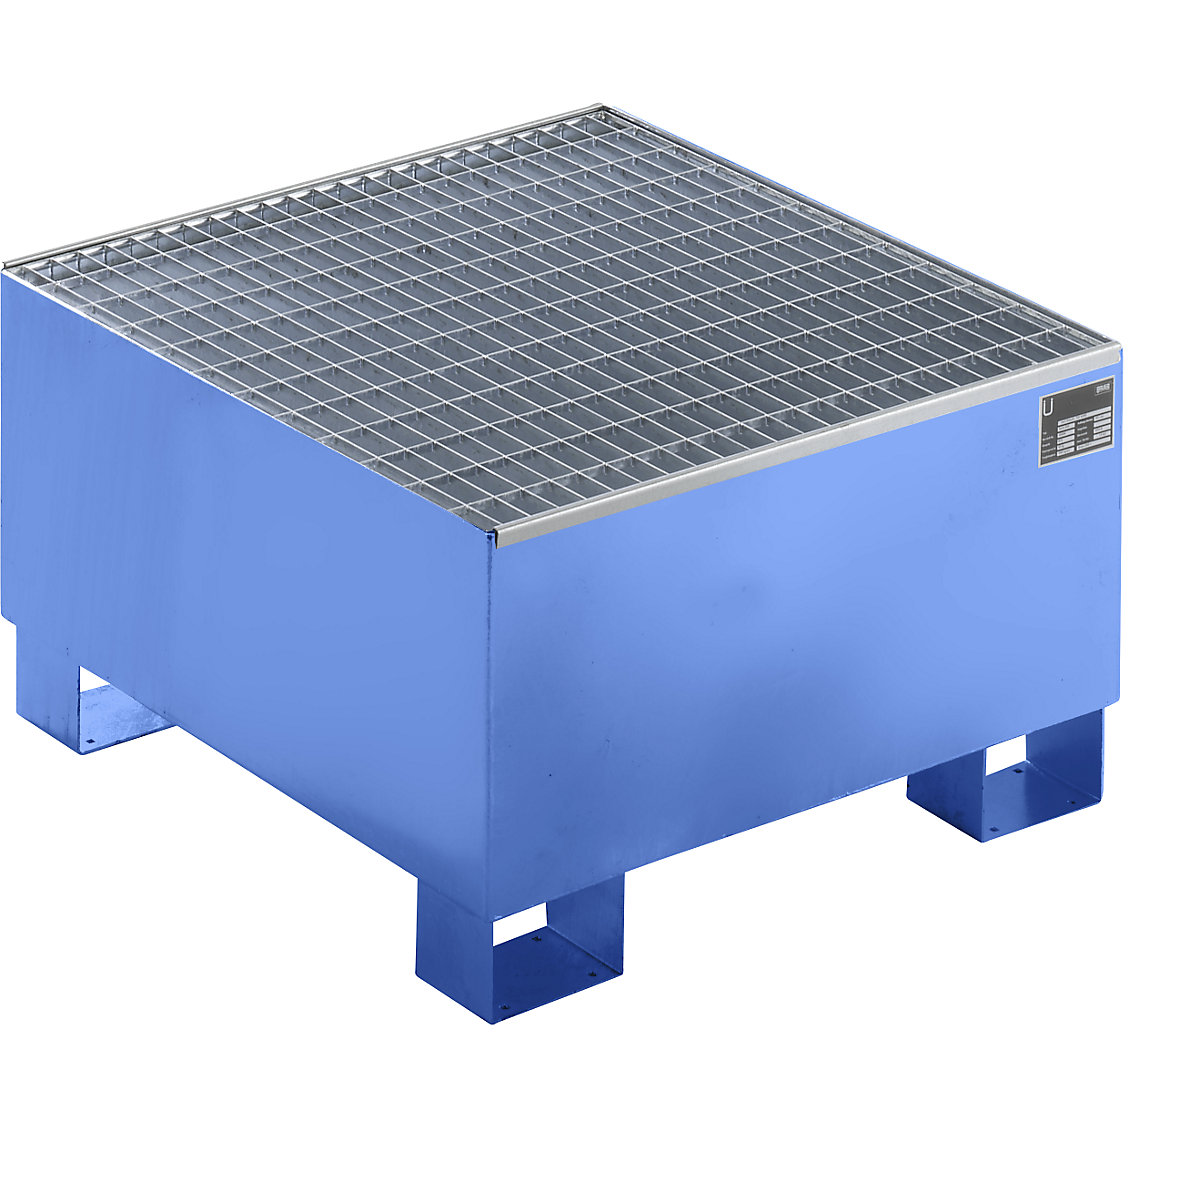 Sump tray made from sheet steel, LxWxH 800 x 800 x 465 mm, blue RAL 5012, with grate